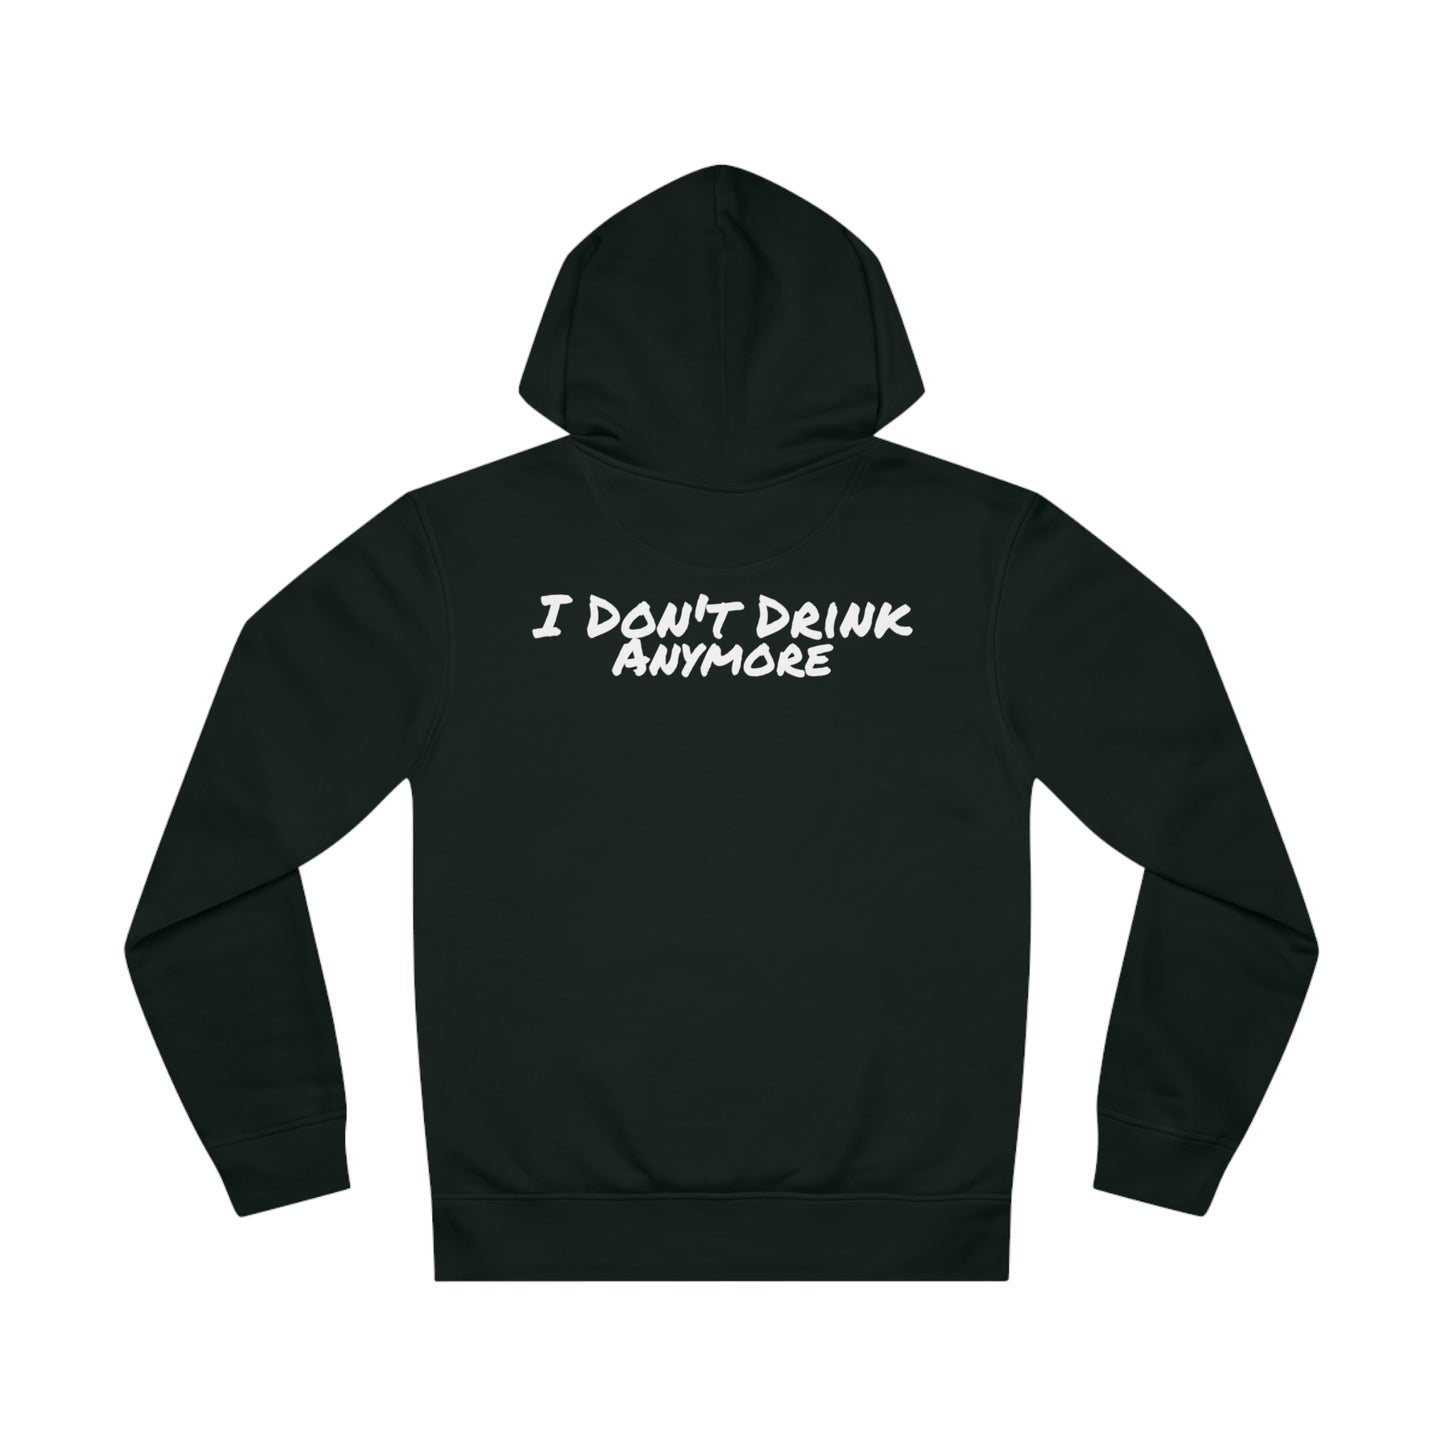 I Don't Drink Anymore Hoody (Front & Back)